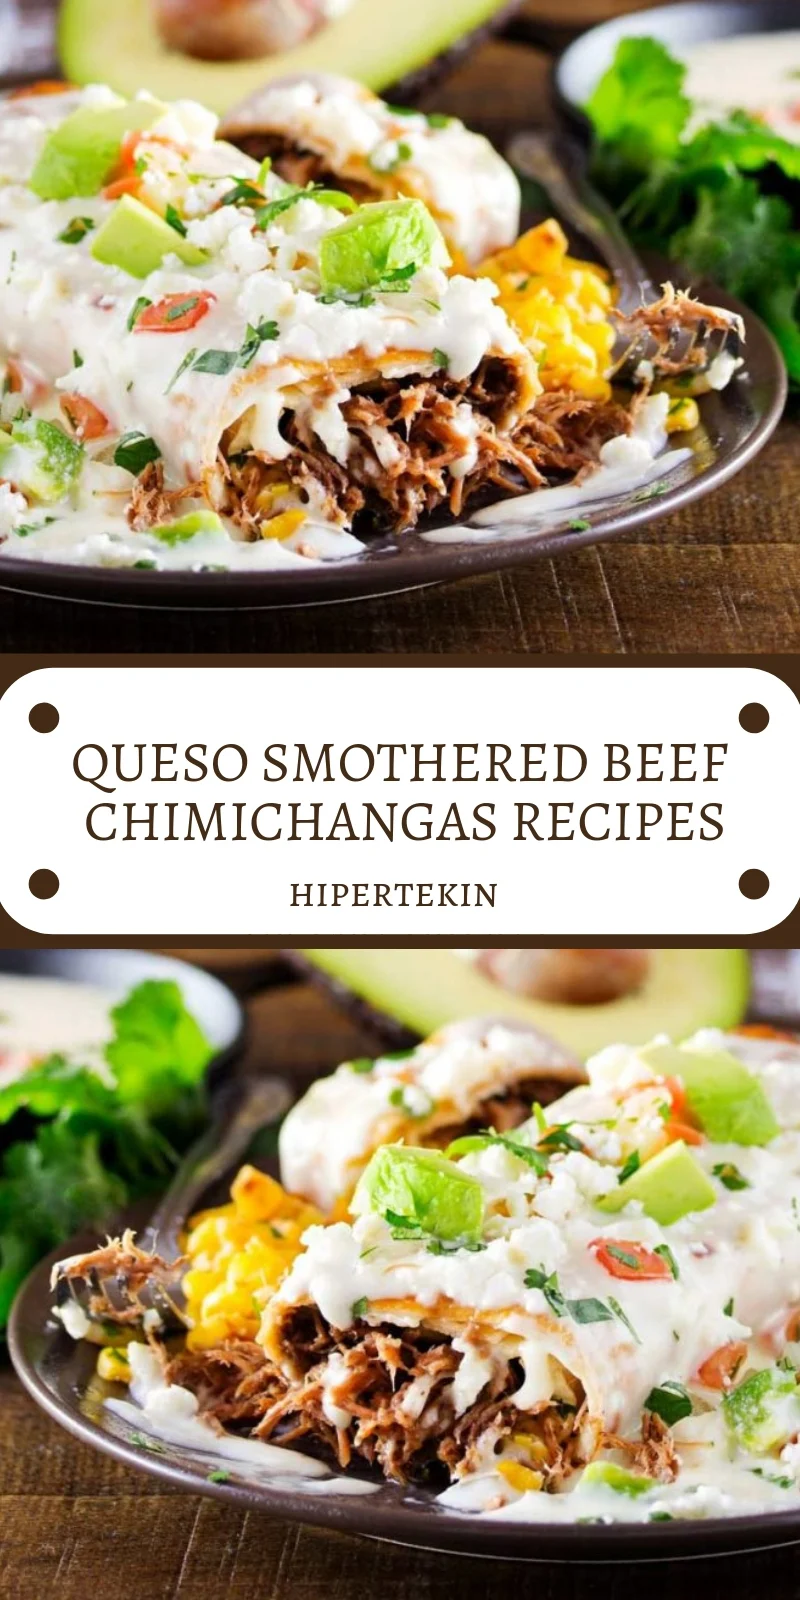 QUESO SMOTHERED BEEF CHIMICHANGAS RECIPES